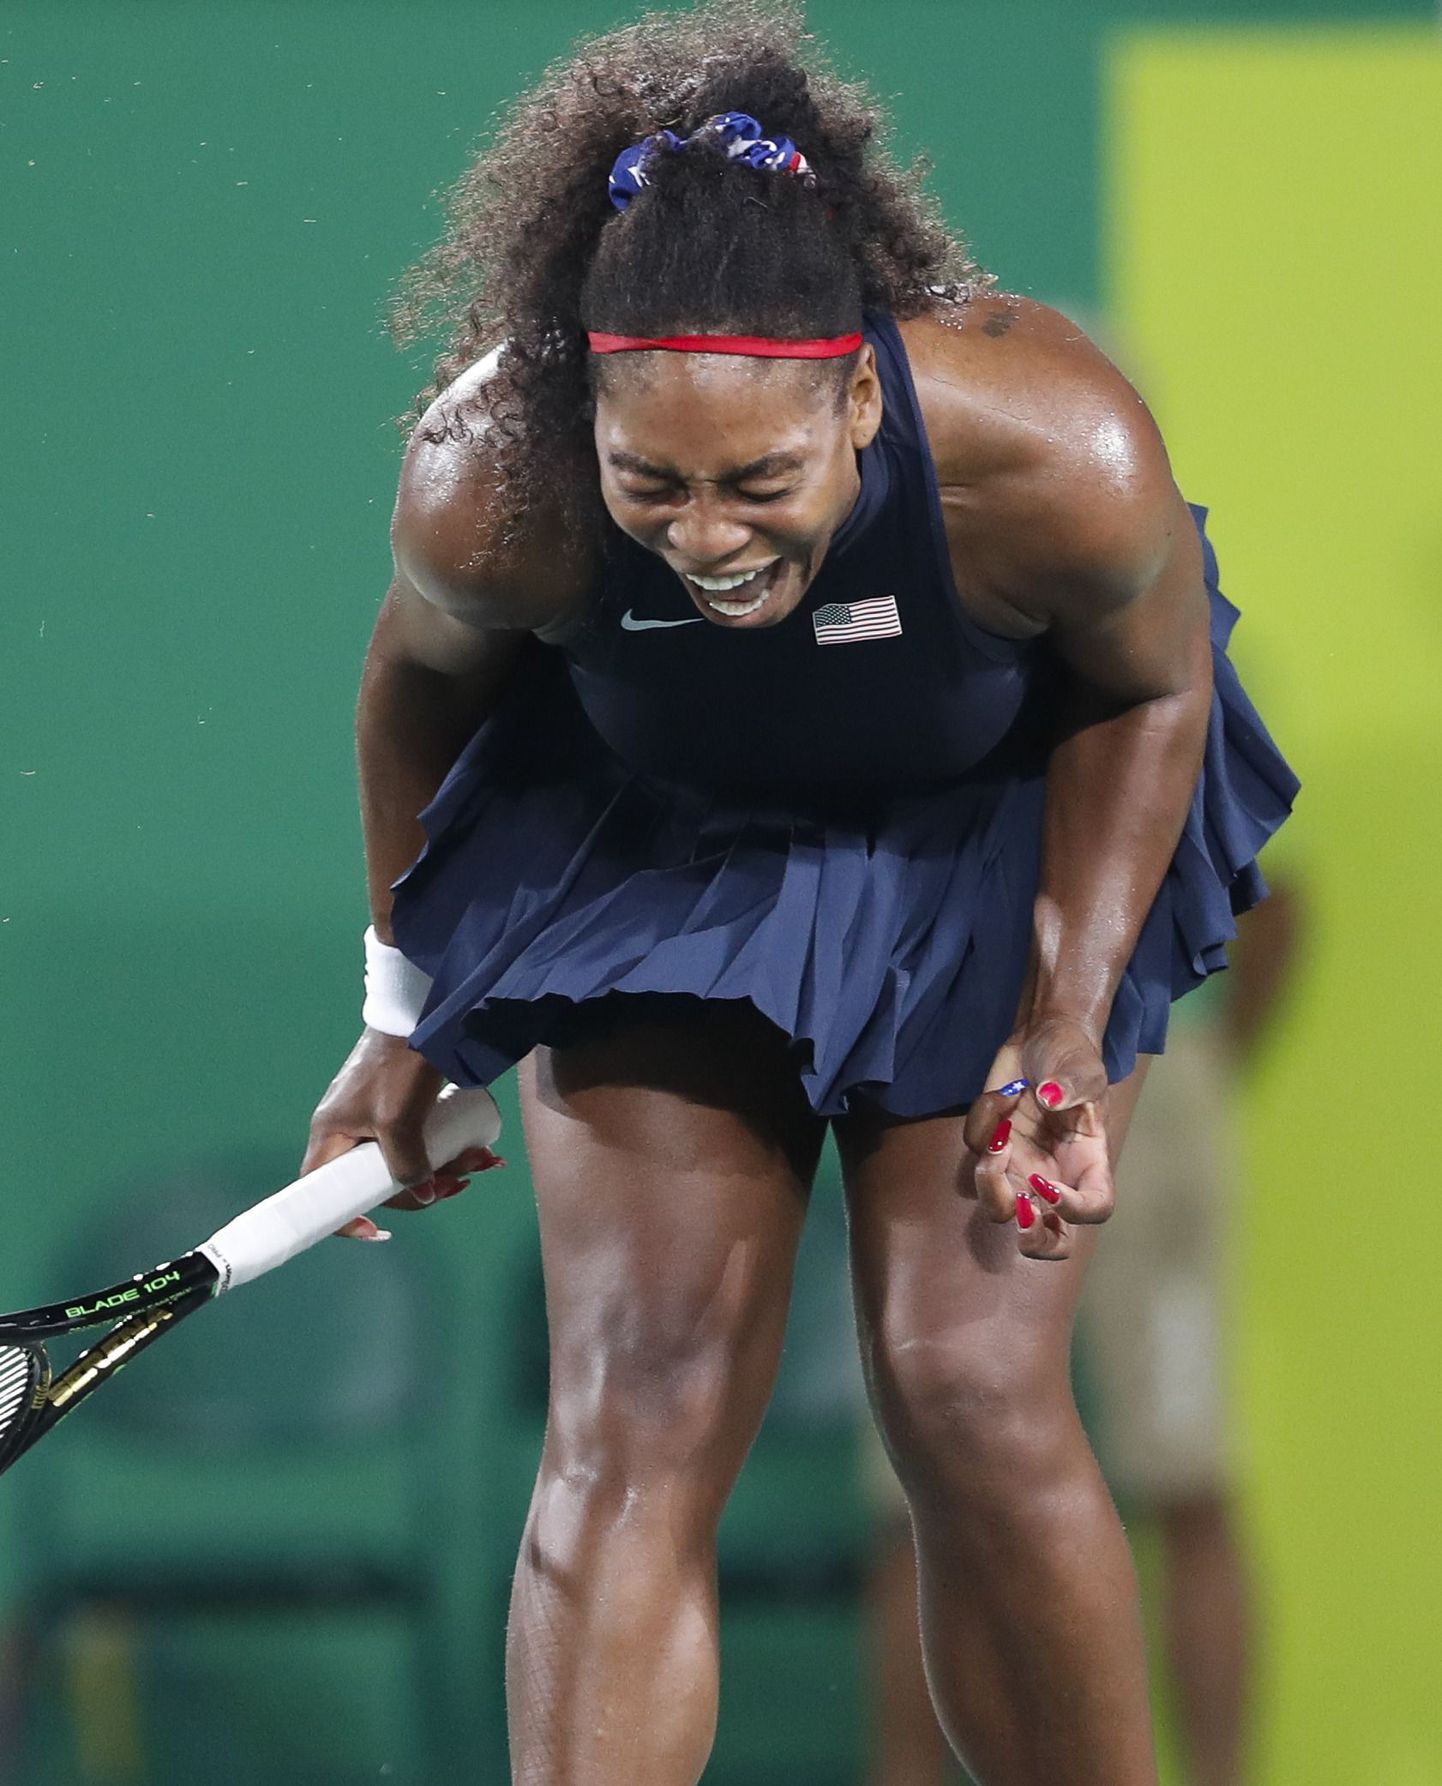 (160809) -- RIO DE JANEIRO, Aug. 9, 2016 (Xinhua) -- Serena Williams of the Unites States of America reacts during a women's sigles third round match of tennis against Elina Svitolina of Ukraine at the 2016 Rio Olympic Games in Rio de Janeiro, Brazil, on Aug. 9, 2016. Elina Svitolina won 2-0. (Xinhua/Han Yan)(xr) (Photo by Xinhua/Sipa USA)